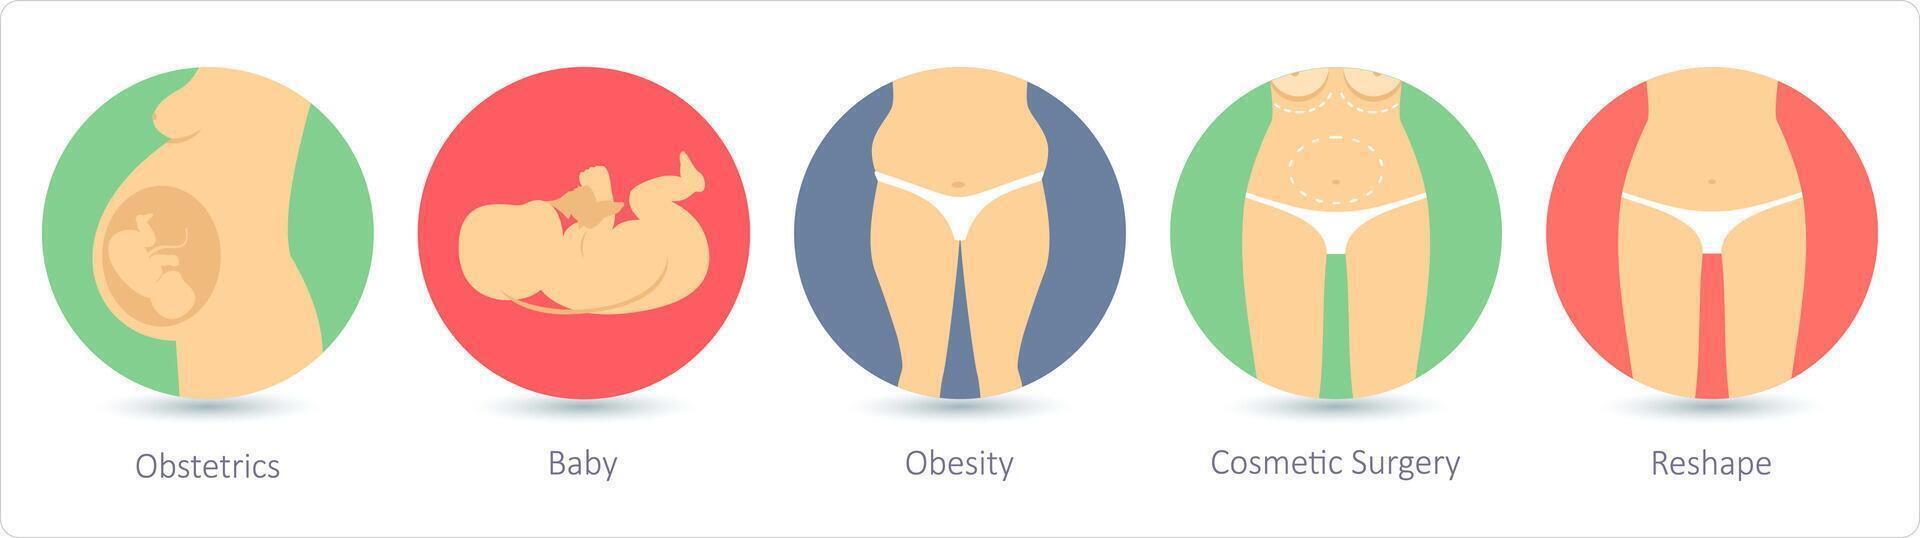 A set of 5 medical icons as obstertrics, baby, obesity vector